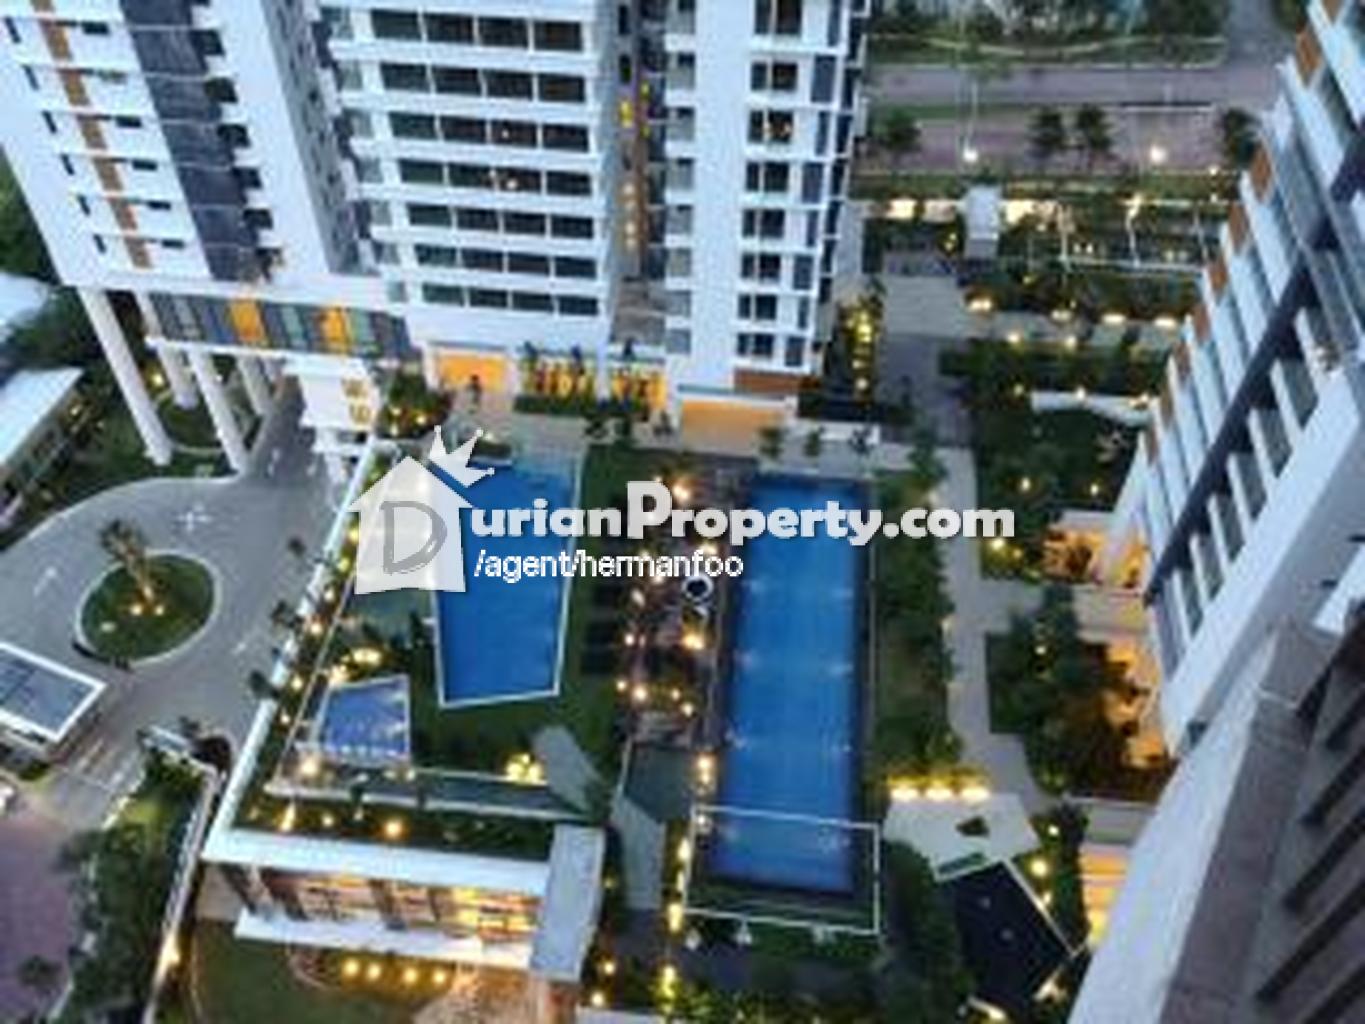 Condo For Sale At A Marine Bandar Sunway For Rm 950 000 By Herman Foo Durianproperty